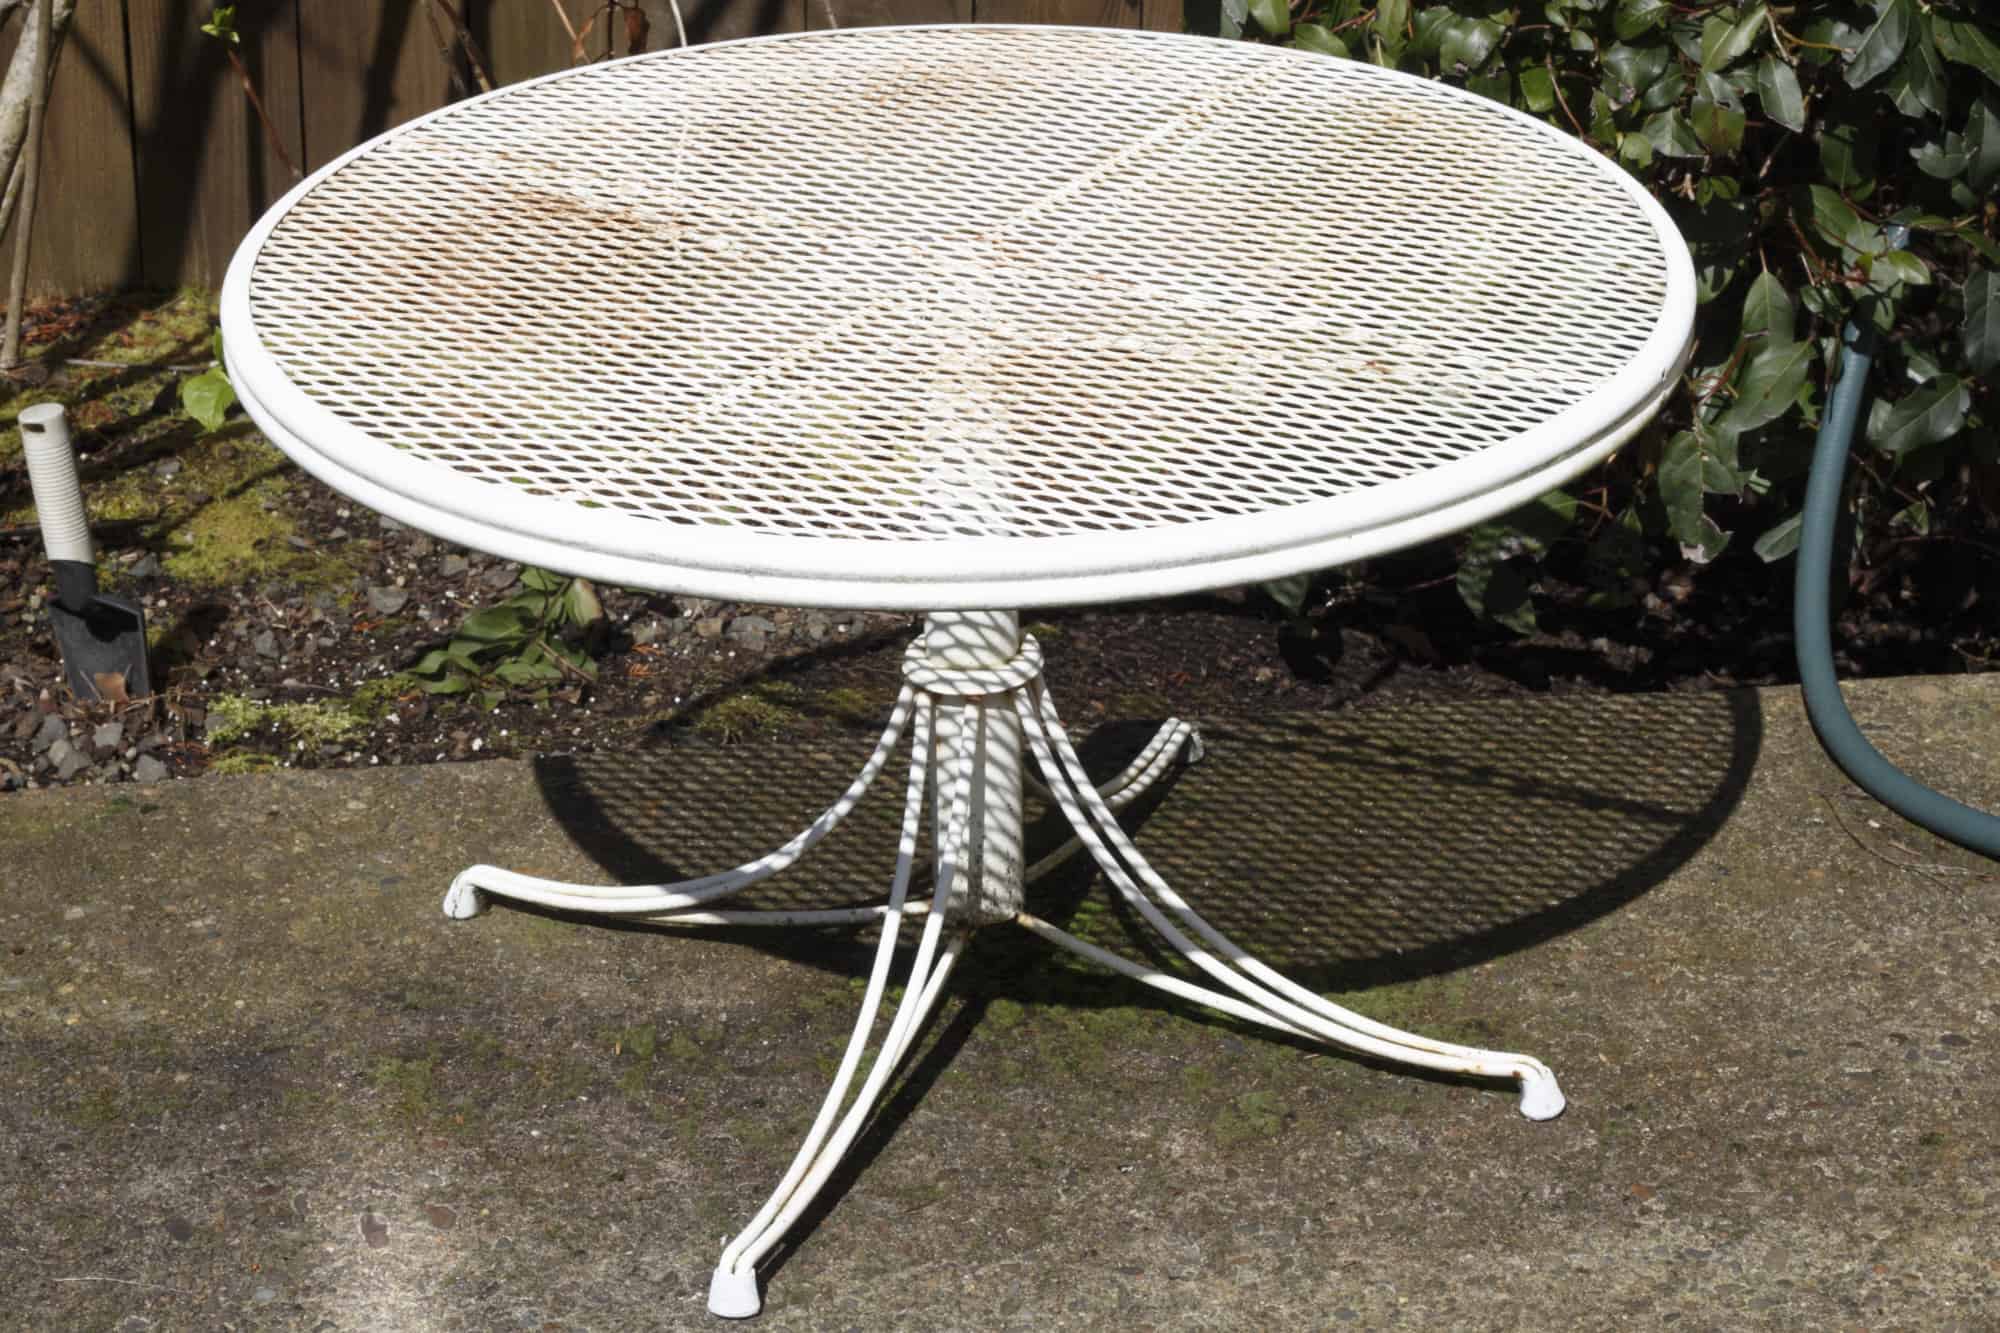 Patio Furniture Leaks Rust, How To Remove Rust Off Patio Furniture